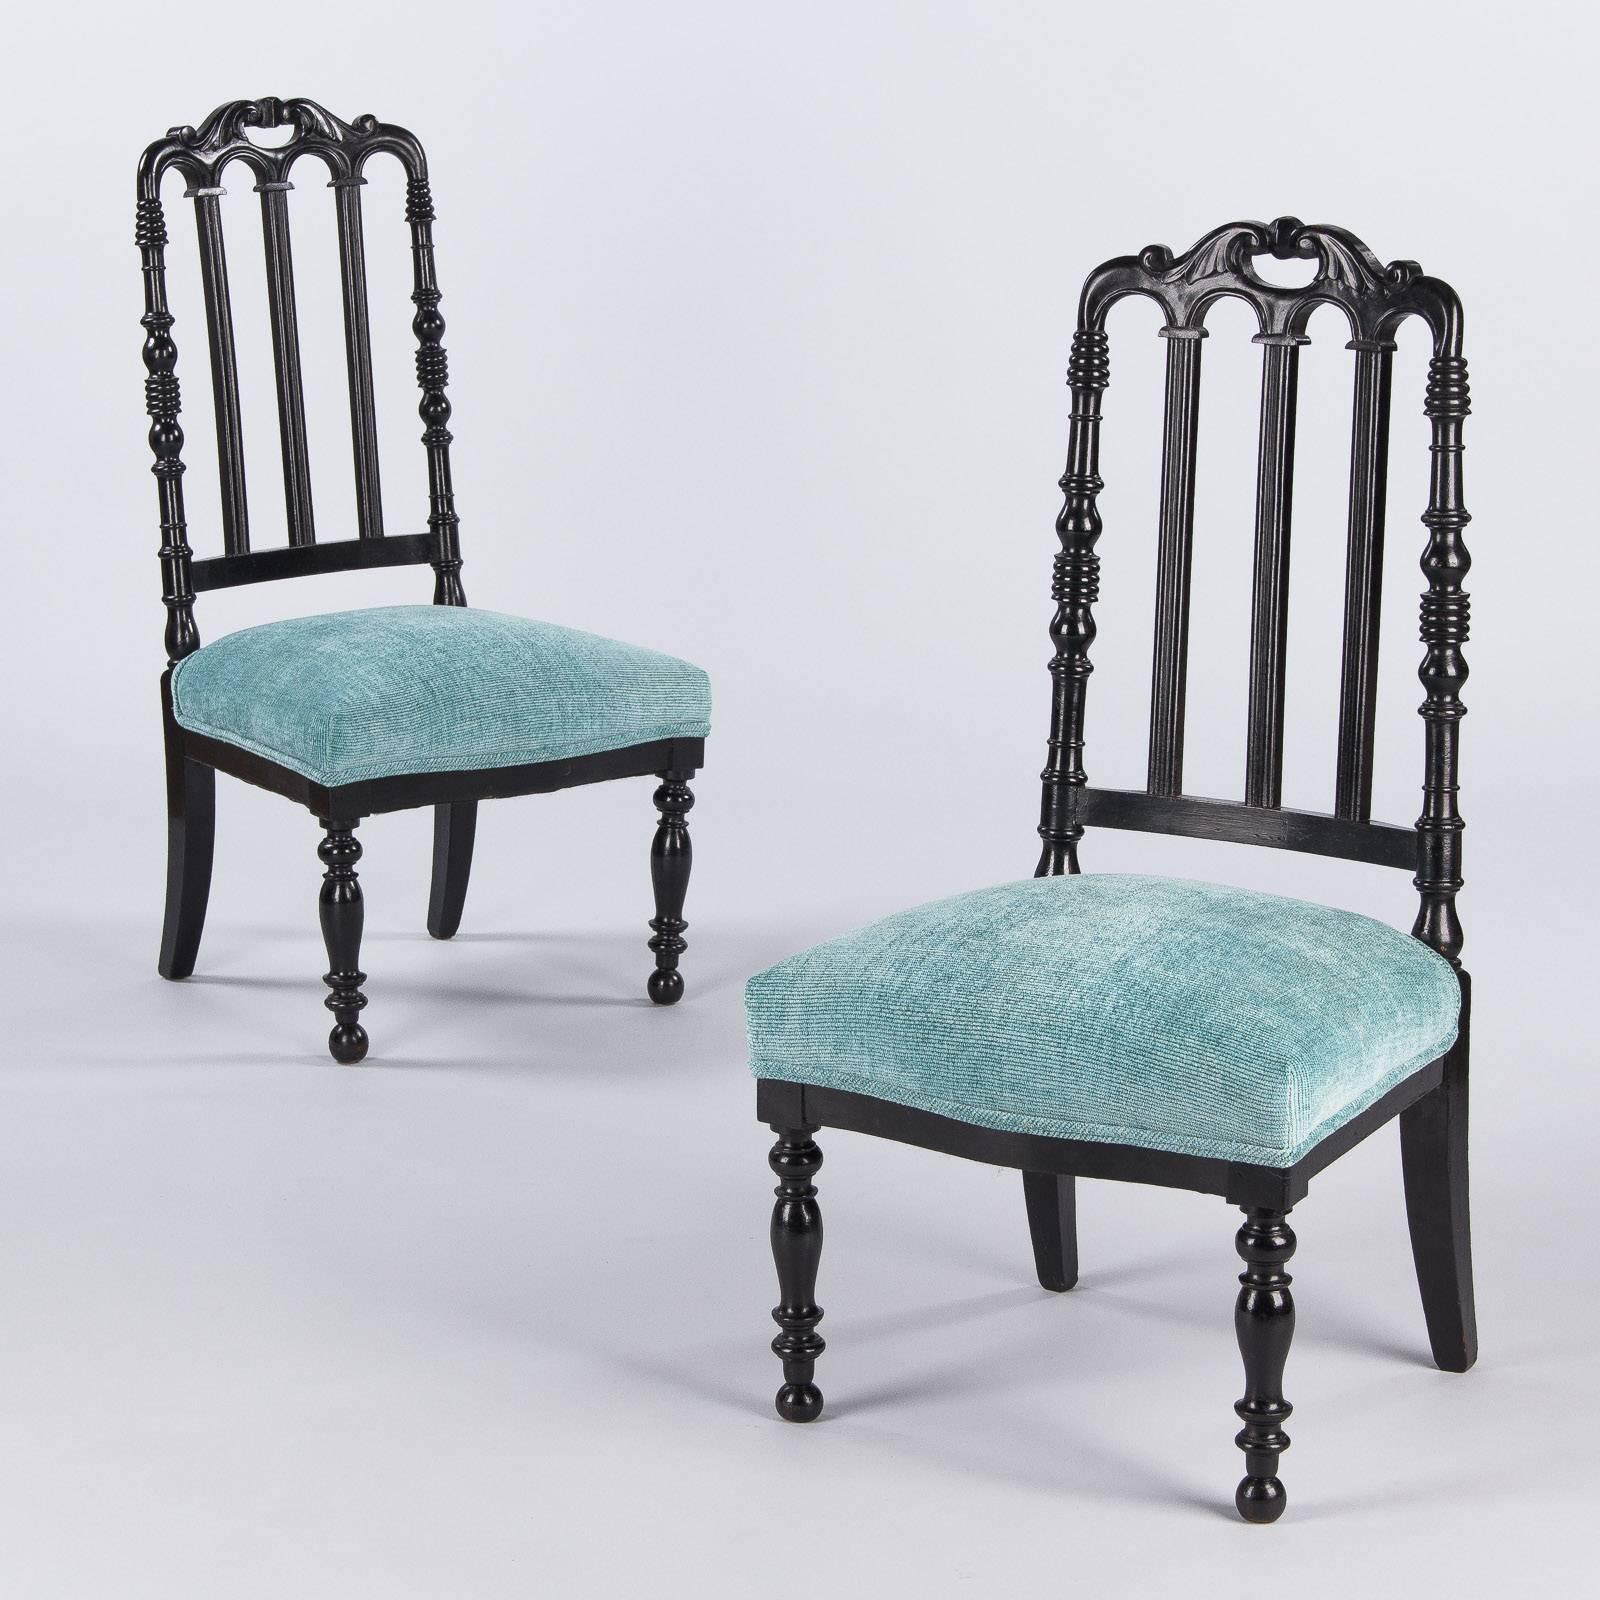 A pair of Napoleon III Chauffeuses, low chairs designed to sit by the fireplace. Made of ebonized pear wood and recently re-upholstered in pale blue, they have a contemporary feel. Dating from the 1870s, these chairs feature a slat back with a